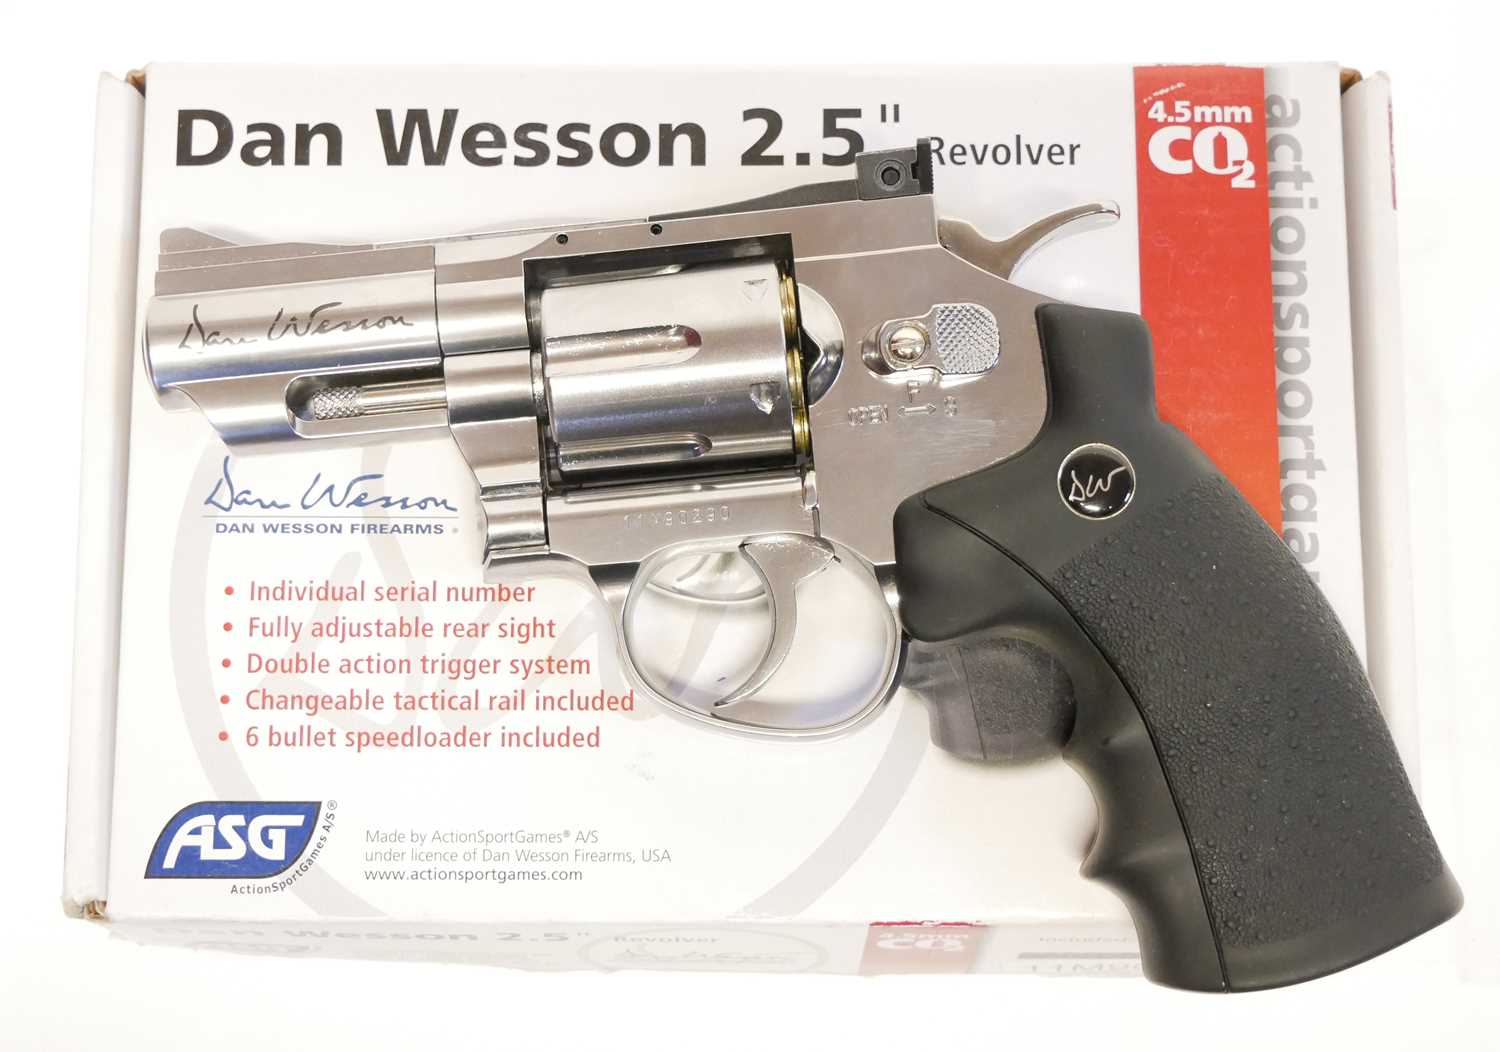 Dan Wesson ASG .177 CO2 Air Pistol revolver, serial number 11M90290, stainless steel finish, 2.5inch - Image 2 of 7